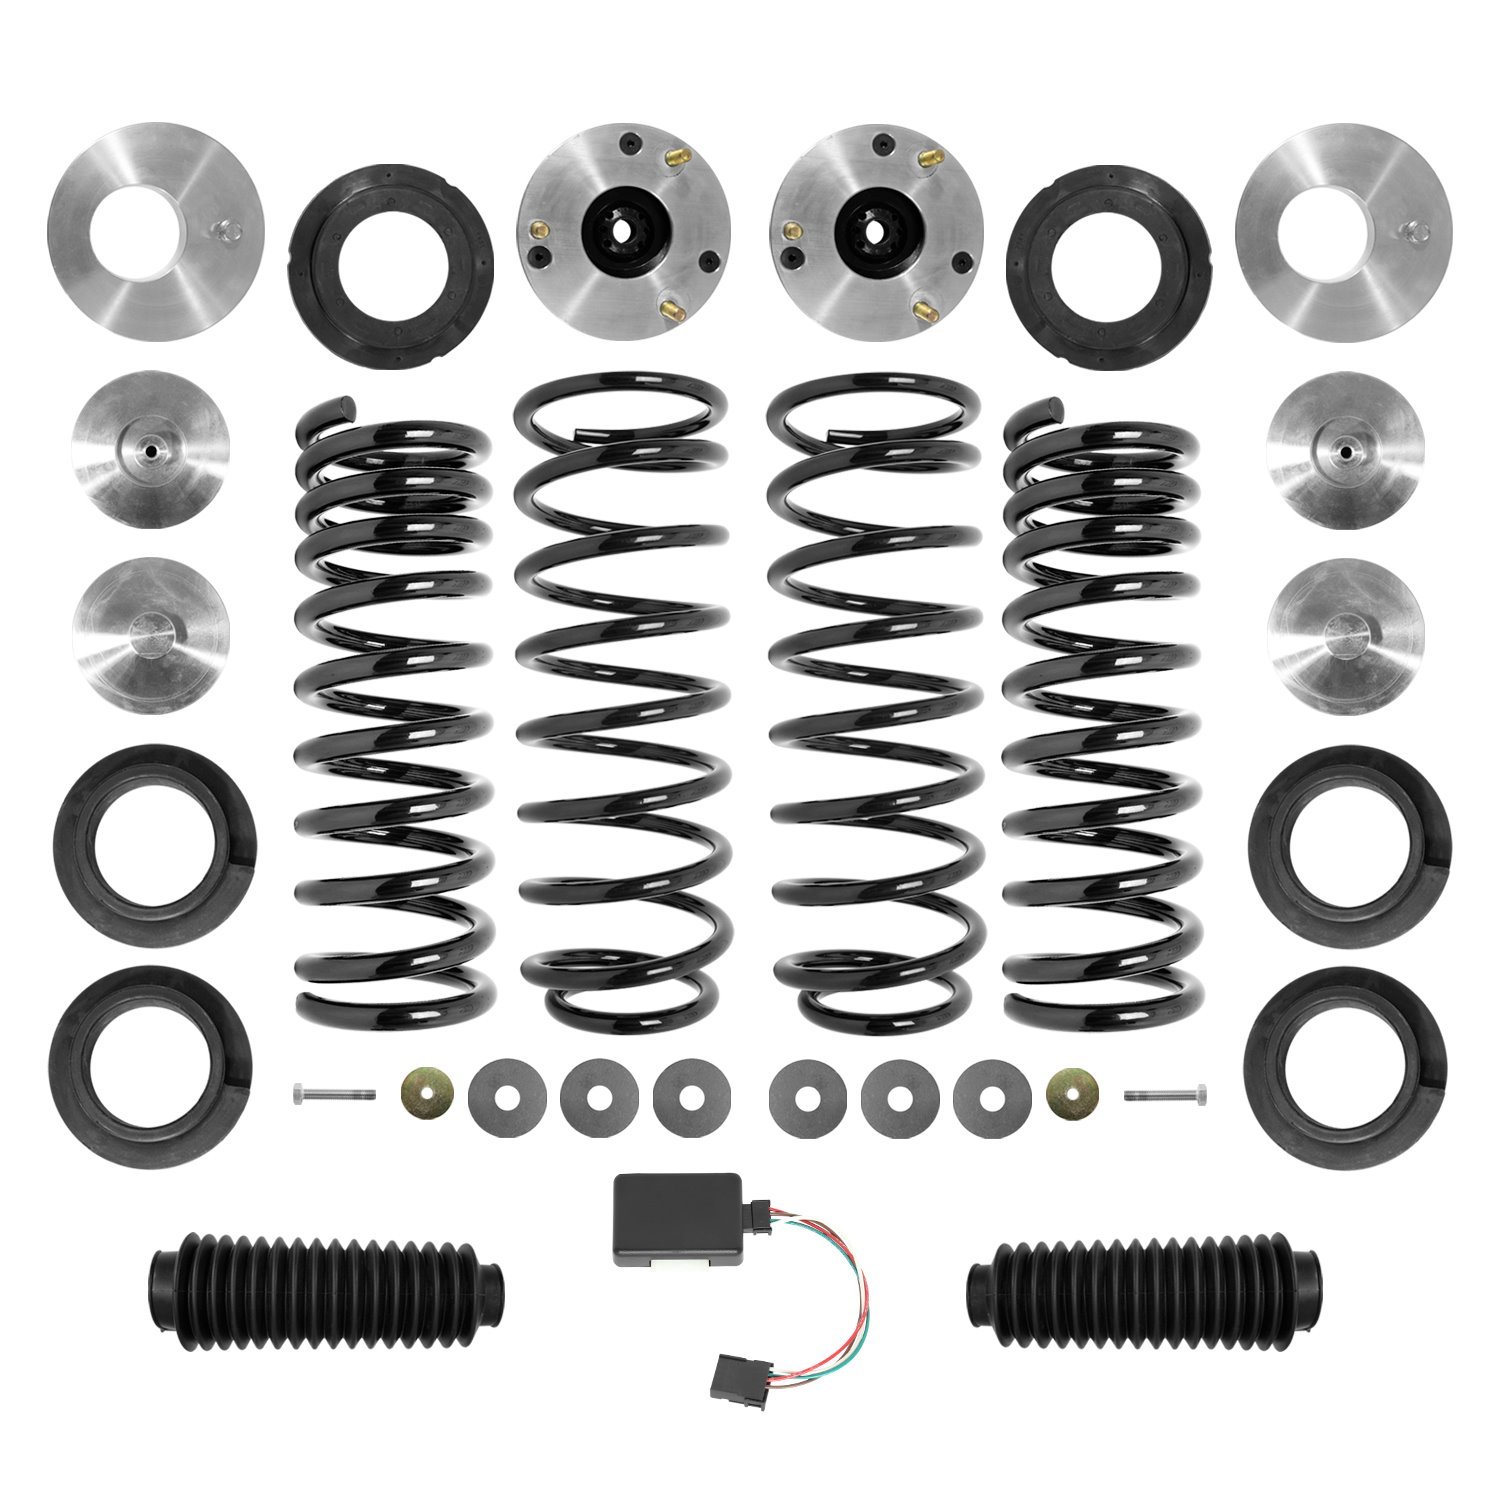 4K-30-172000 Air Spring To Coil Spring Conversion Kit Fits Select Land Rover Range Rover